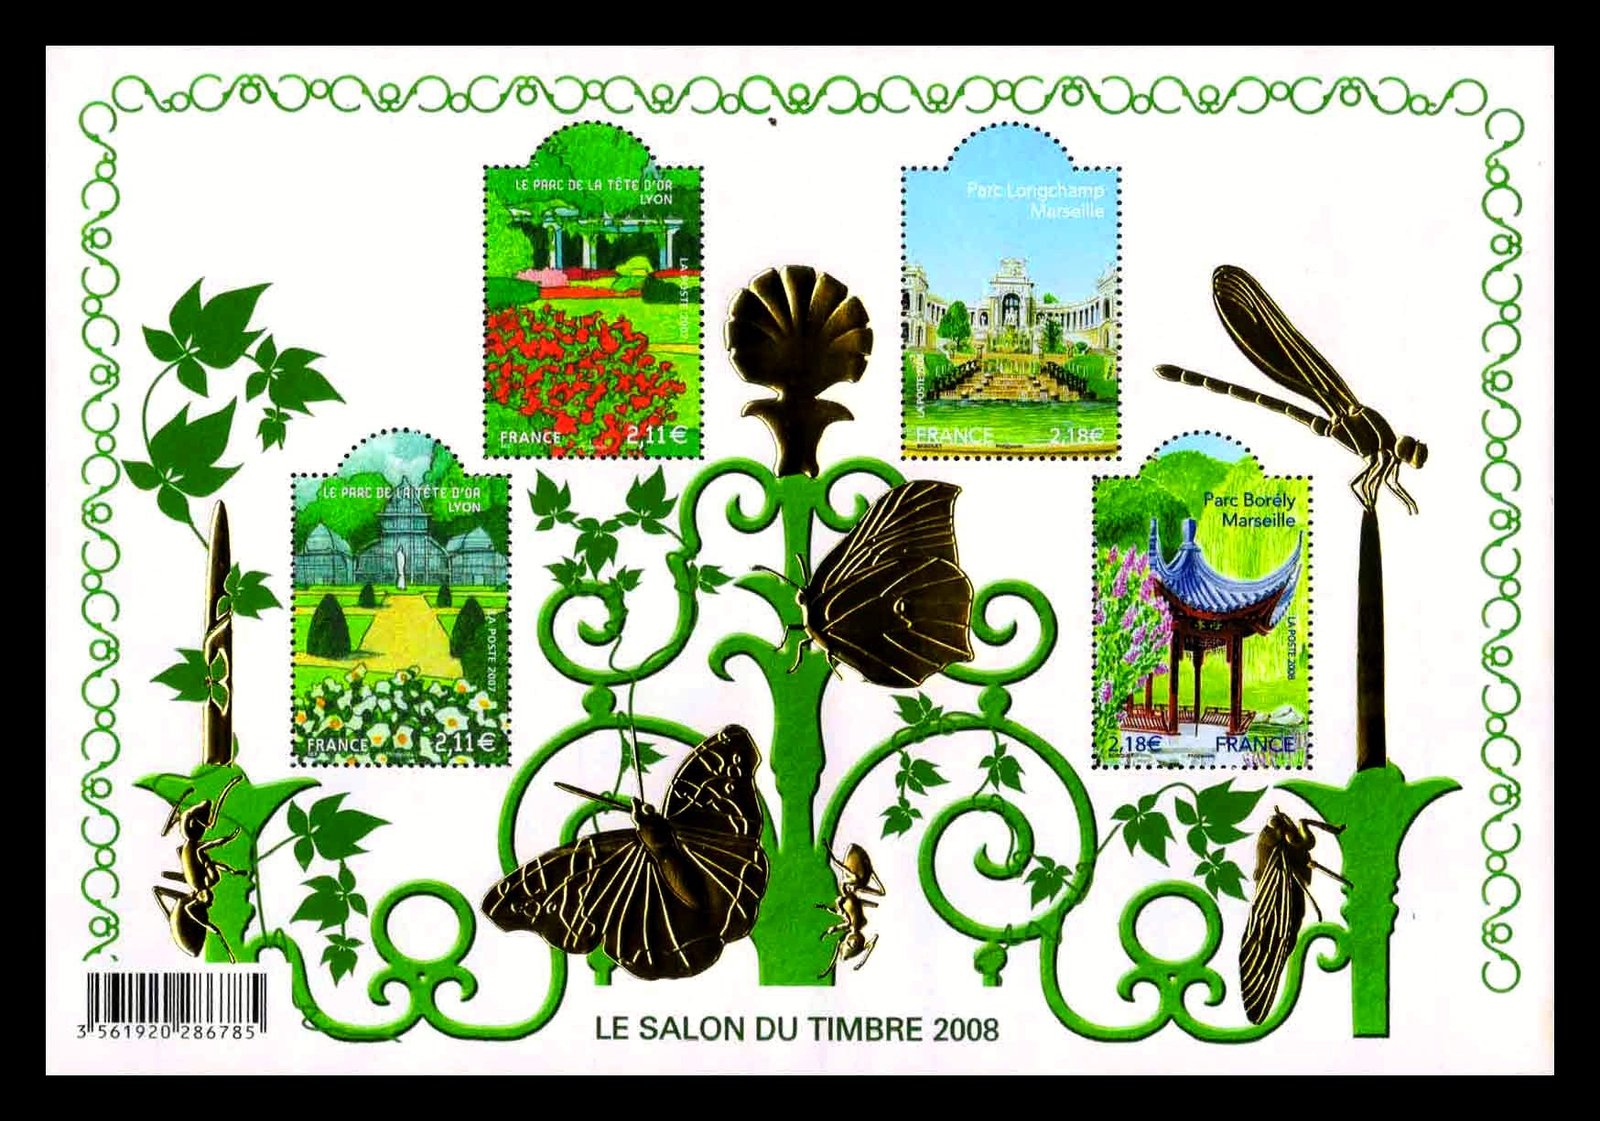 FRANCE 2008 - French Gardens, Sheet of 4 Odd Shaped Stamps, Gold Embossed Miniature Sheet, MNH, S.G. MS 4382